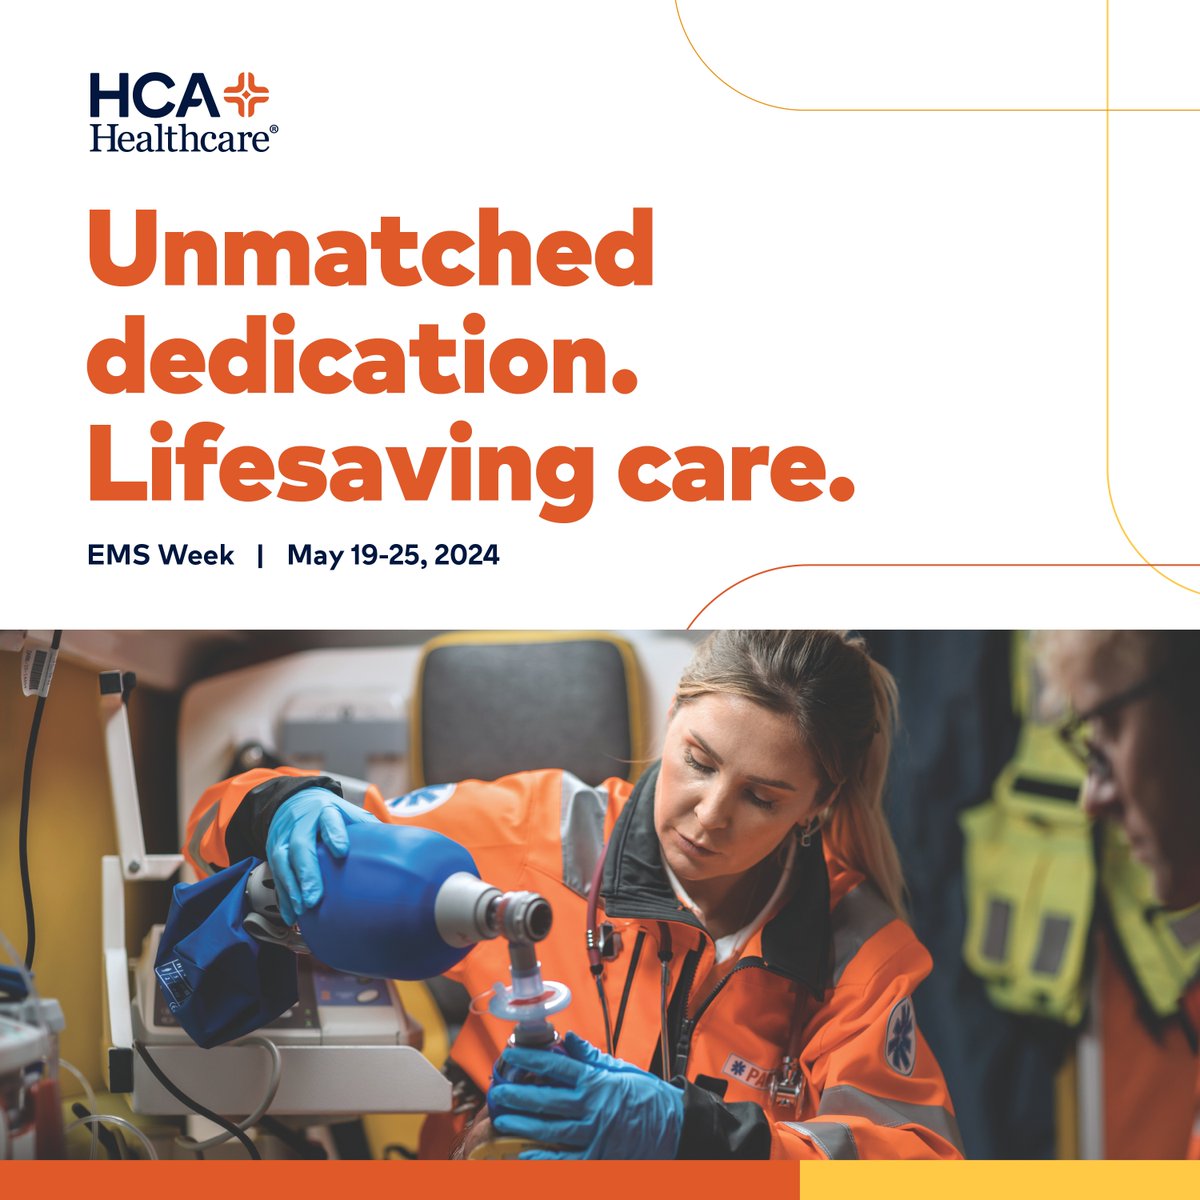 This 50th anniversary of #EMSWeek, we’re joining our larger @HCAhealthcare network of care in recognizing the unmatched dedication displayed by first responders each and every day. Thank you for caring for our patients and communities with skill and bravery. #PositiveImpact